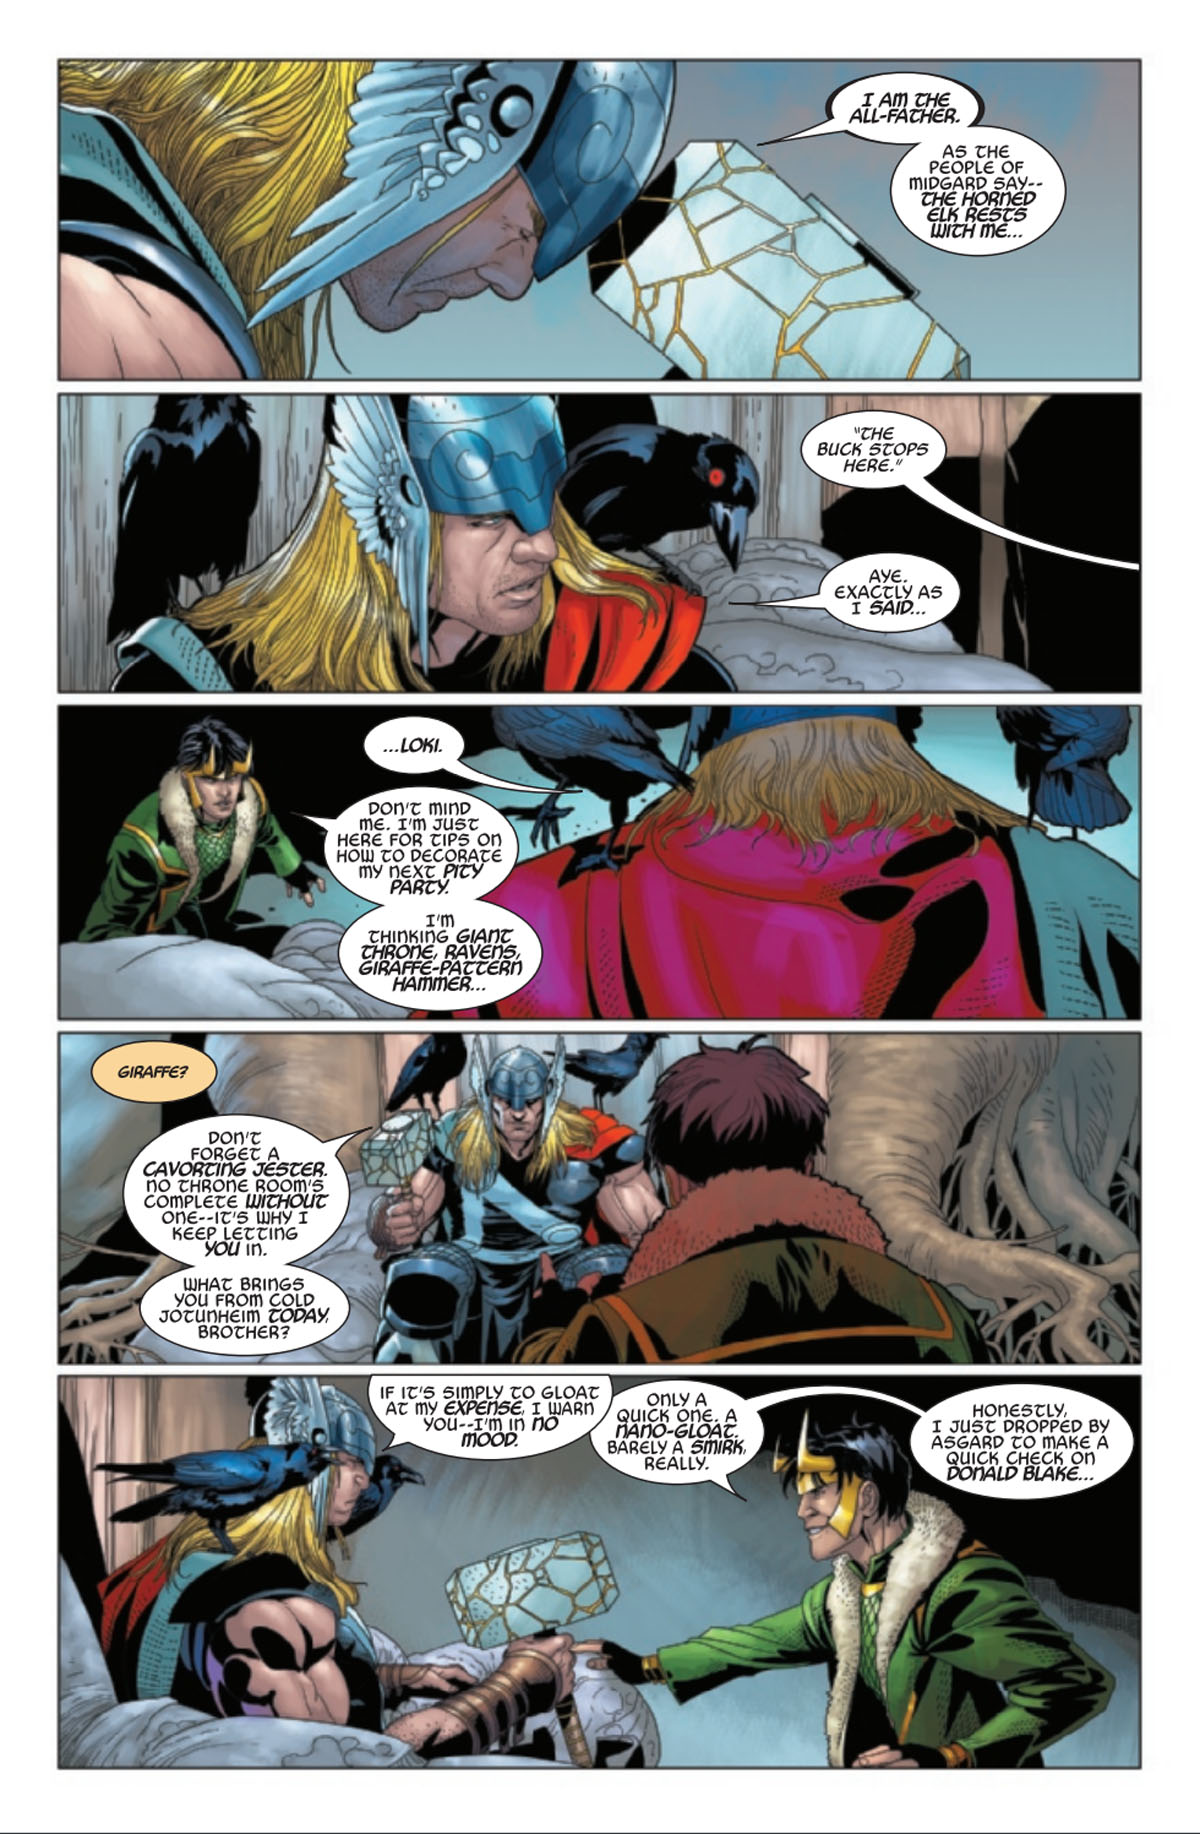 Thor #27 page 3